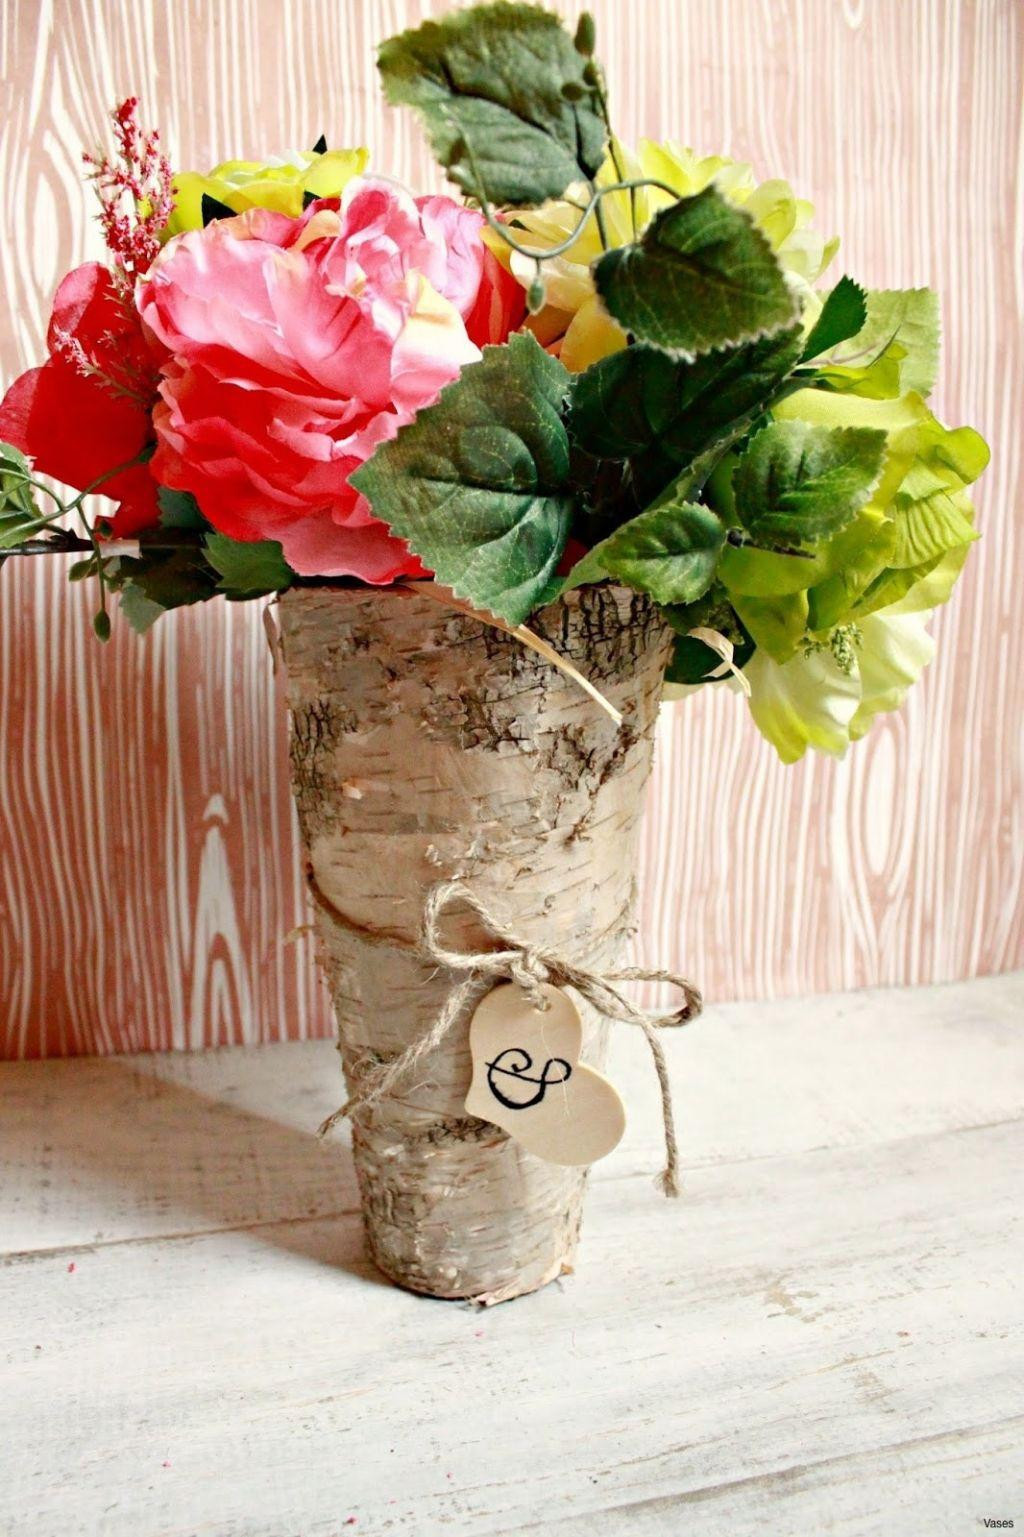 cheap large vases for weddings of beautiful of diy wedding decorations on a budget gallery with regard to wedding a bud new flowers and decorations for weddings h vases diy wood vase i 0d